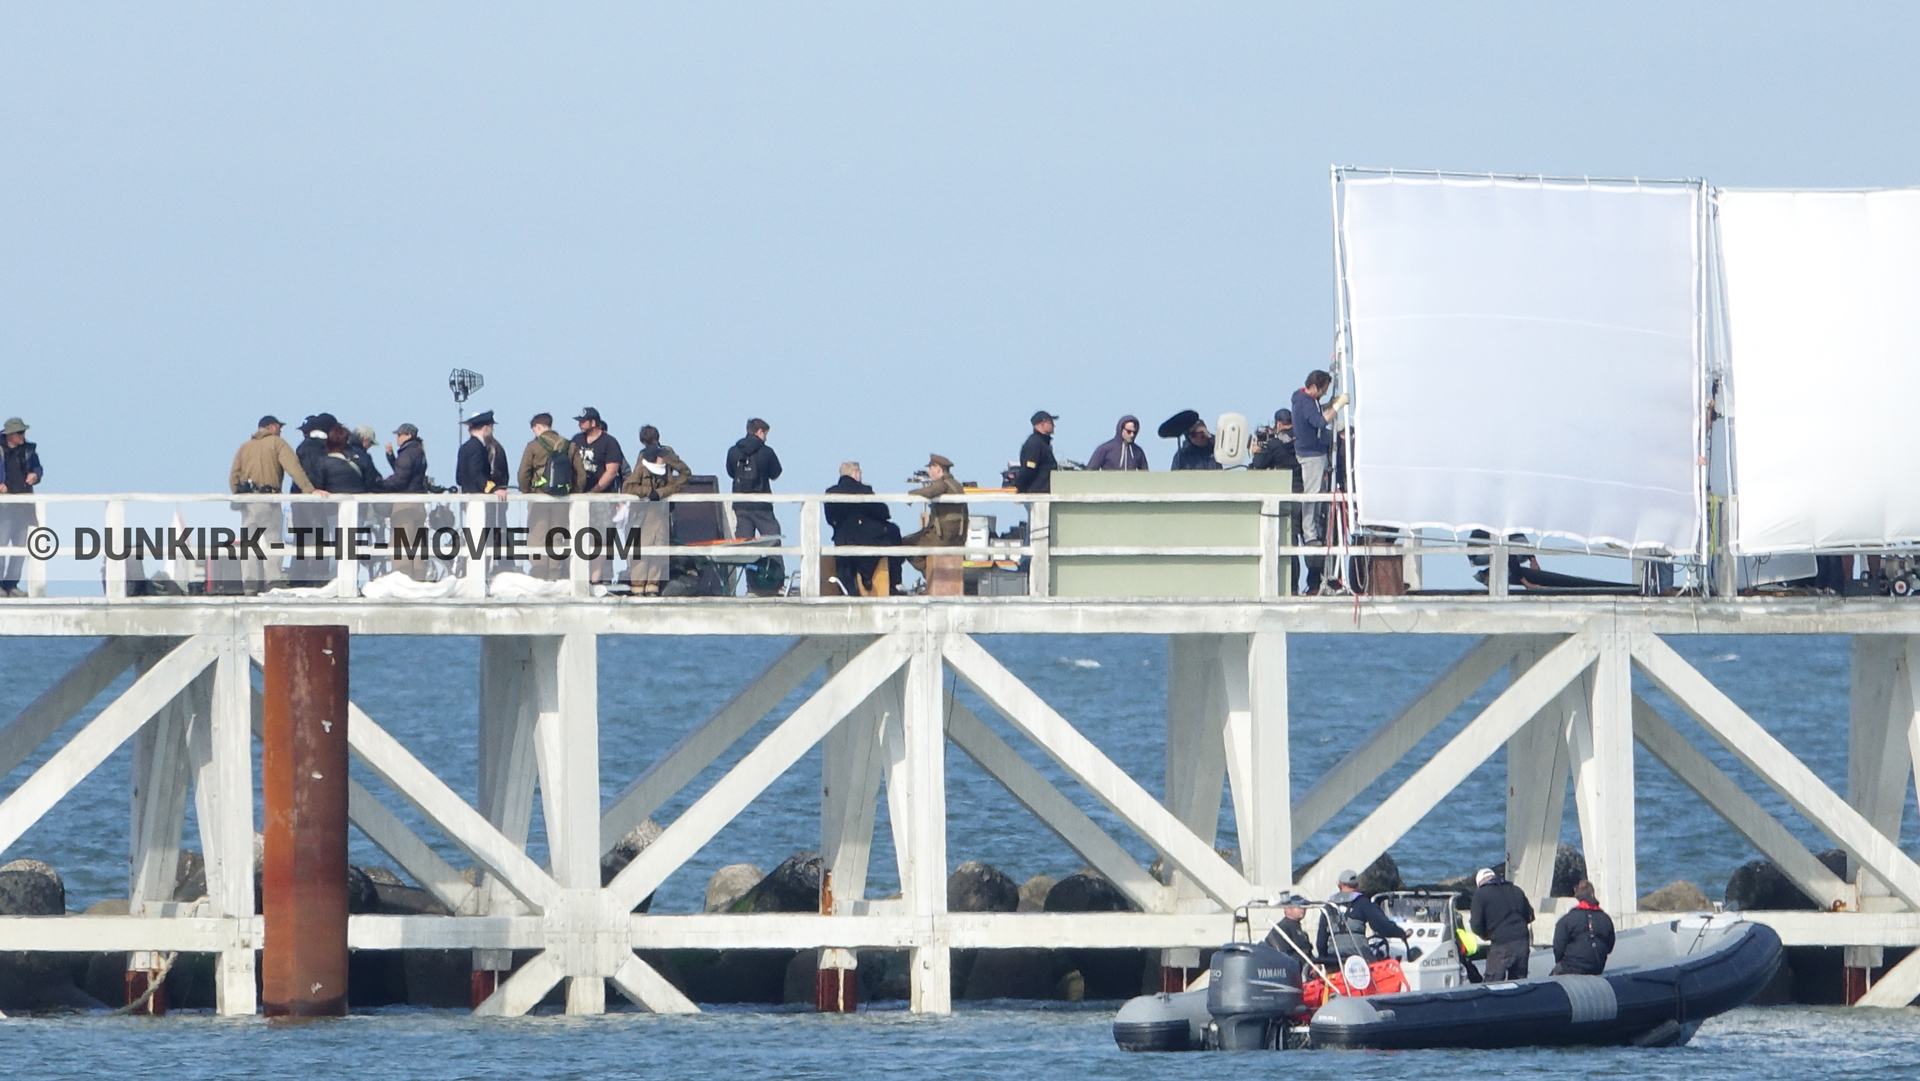 Picture with blue sky, EST pier, Kenneth Branagh, technical team, inflatable dinghy,  from behind the scene of the Dunkirk movie by Nolan